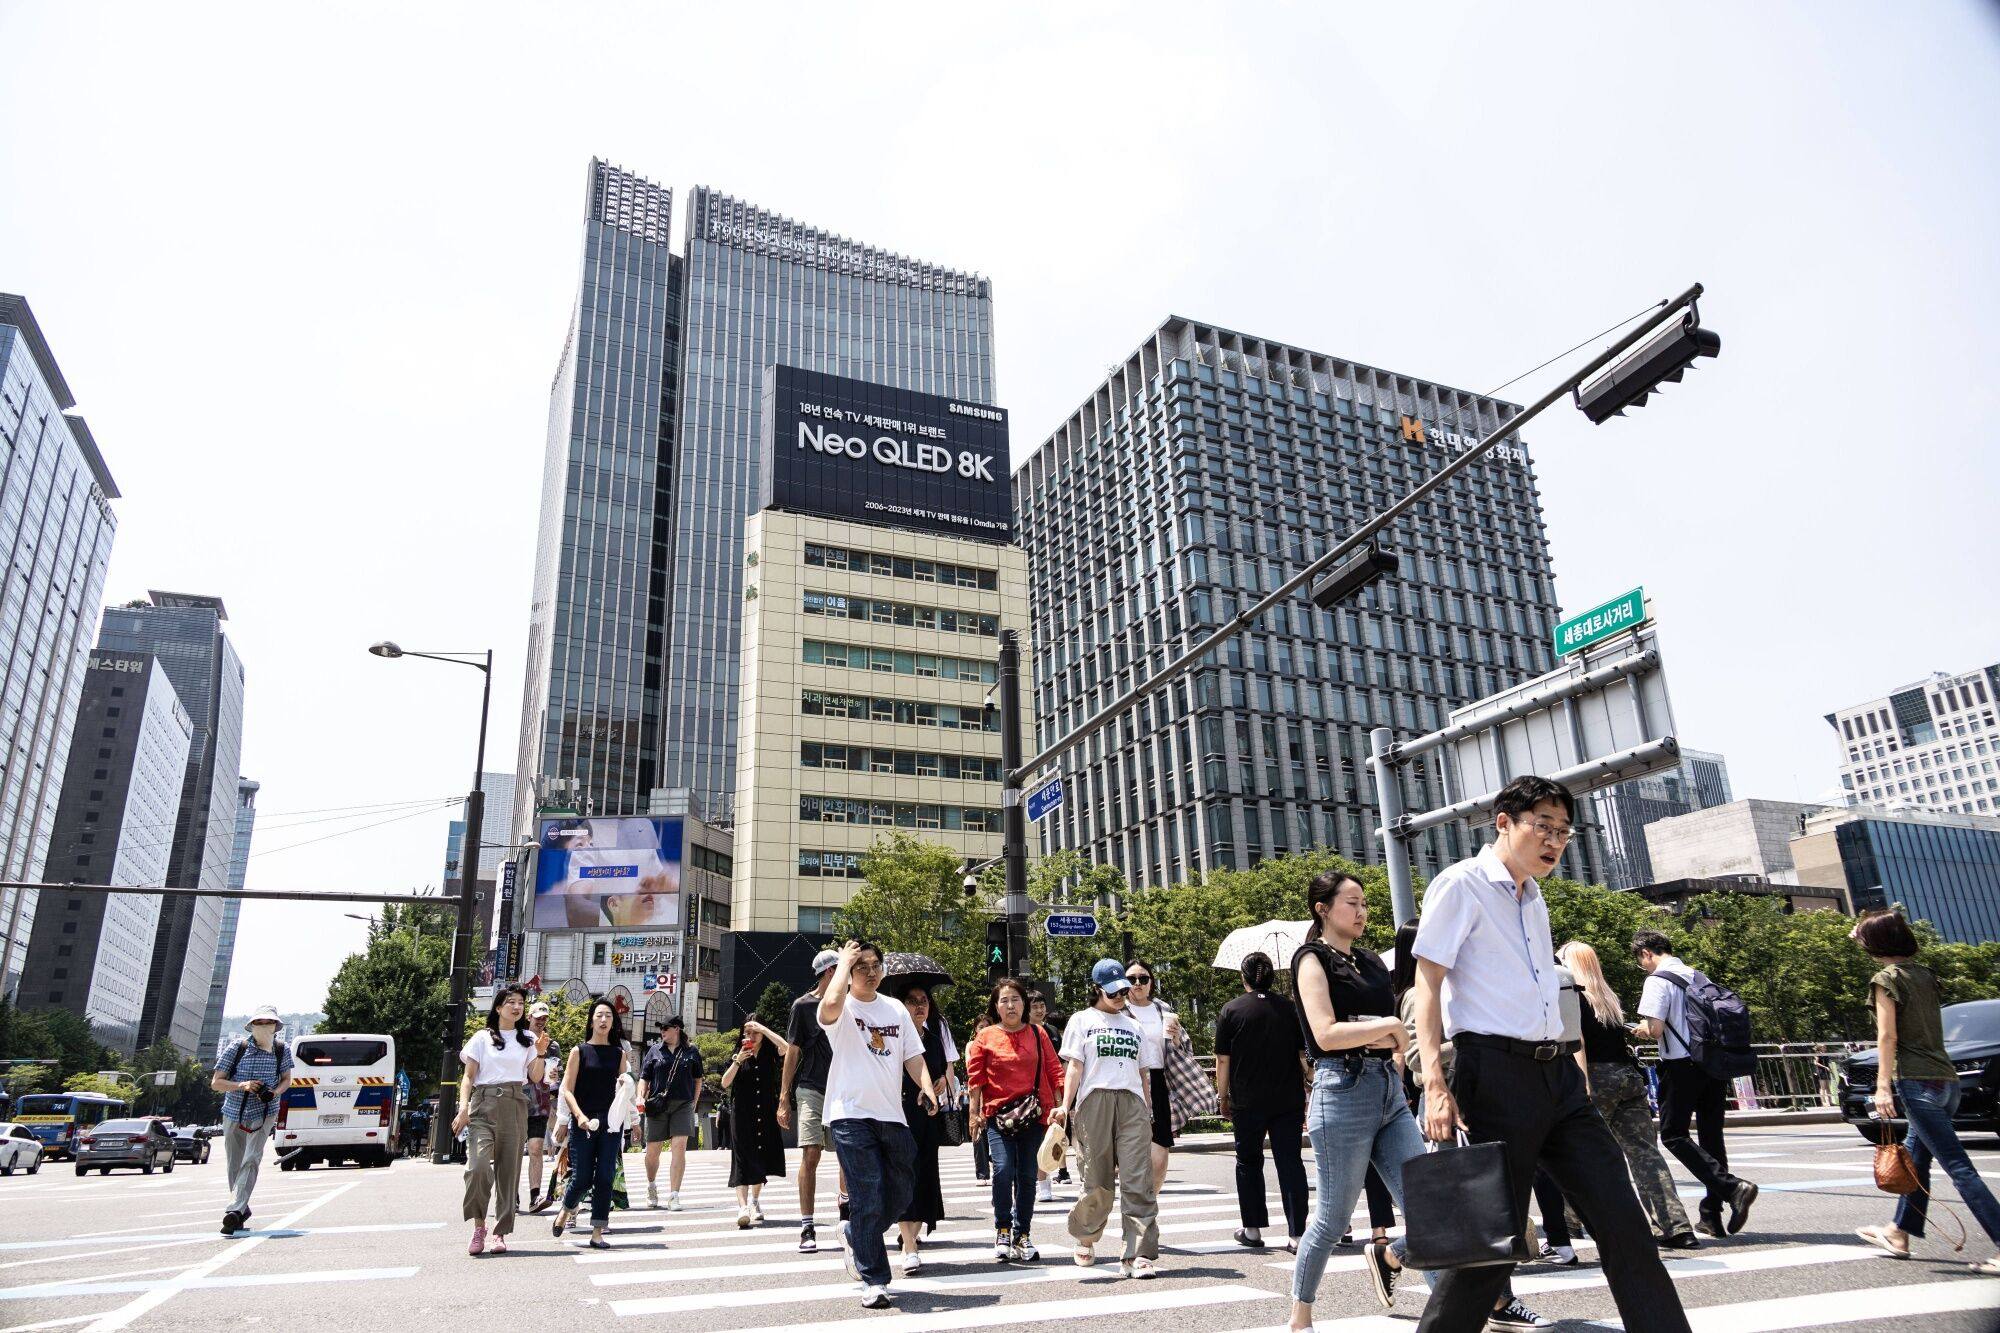 People cross a street in Seoul, South Korea, on Friday. Carmaker Renault Korea Motors is embroiled in a misandry backlash online sparked by promotional content. Photo: Bloomberg